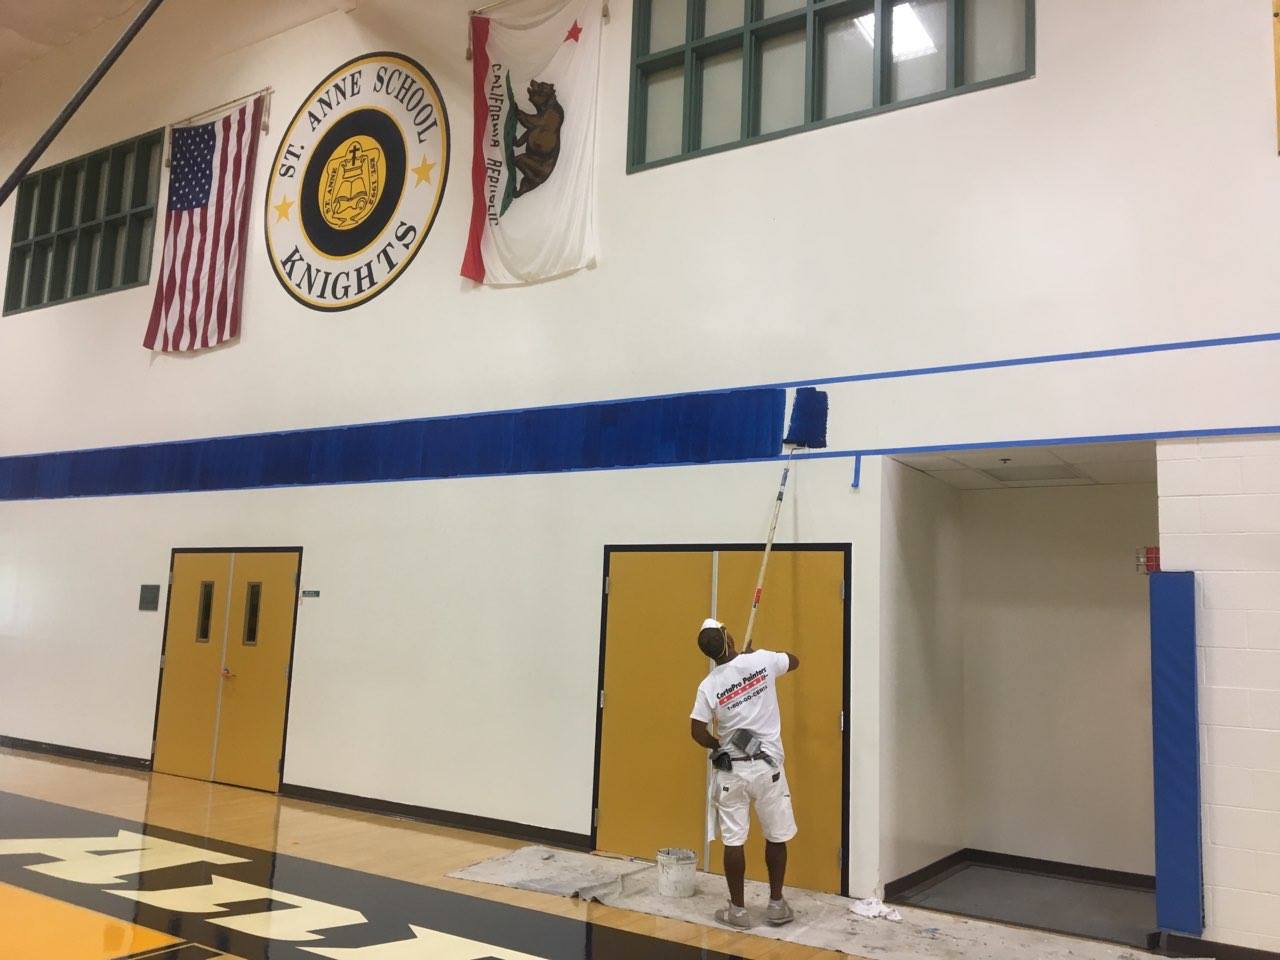 Painting a gym